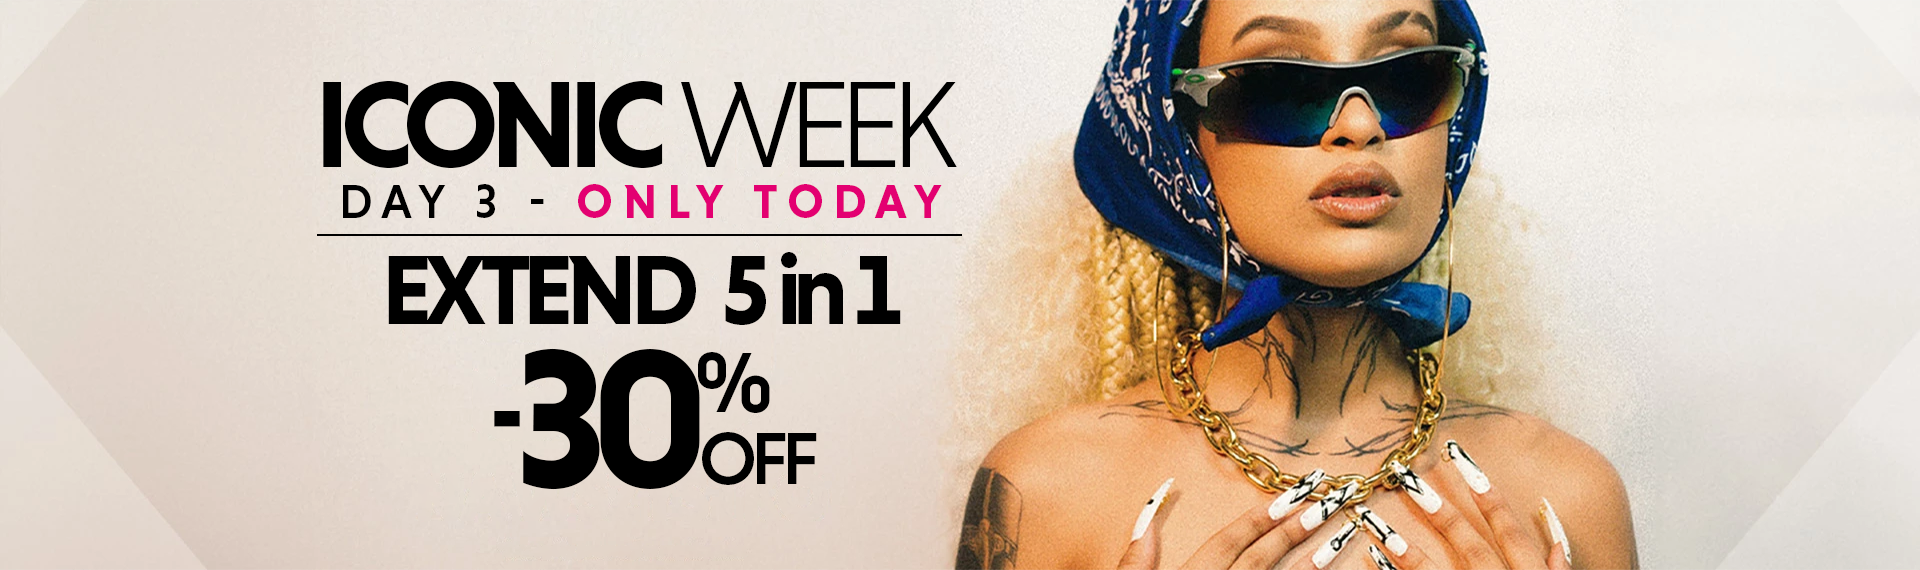 ICONIC WEEK DAY 3 - EXTEND 5in1 -30% OFF